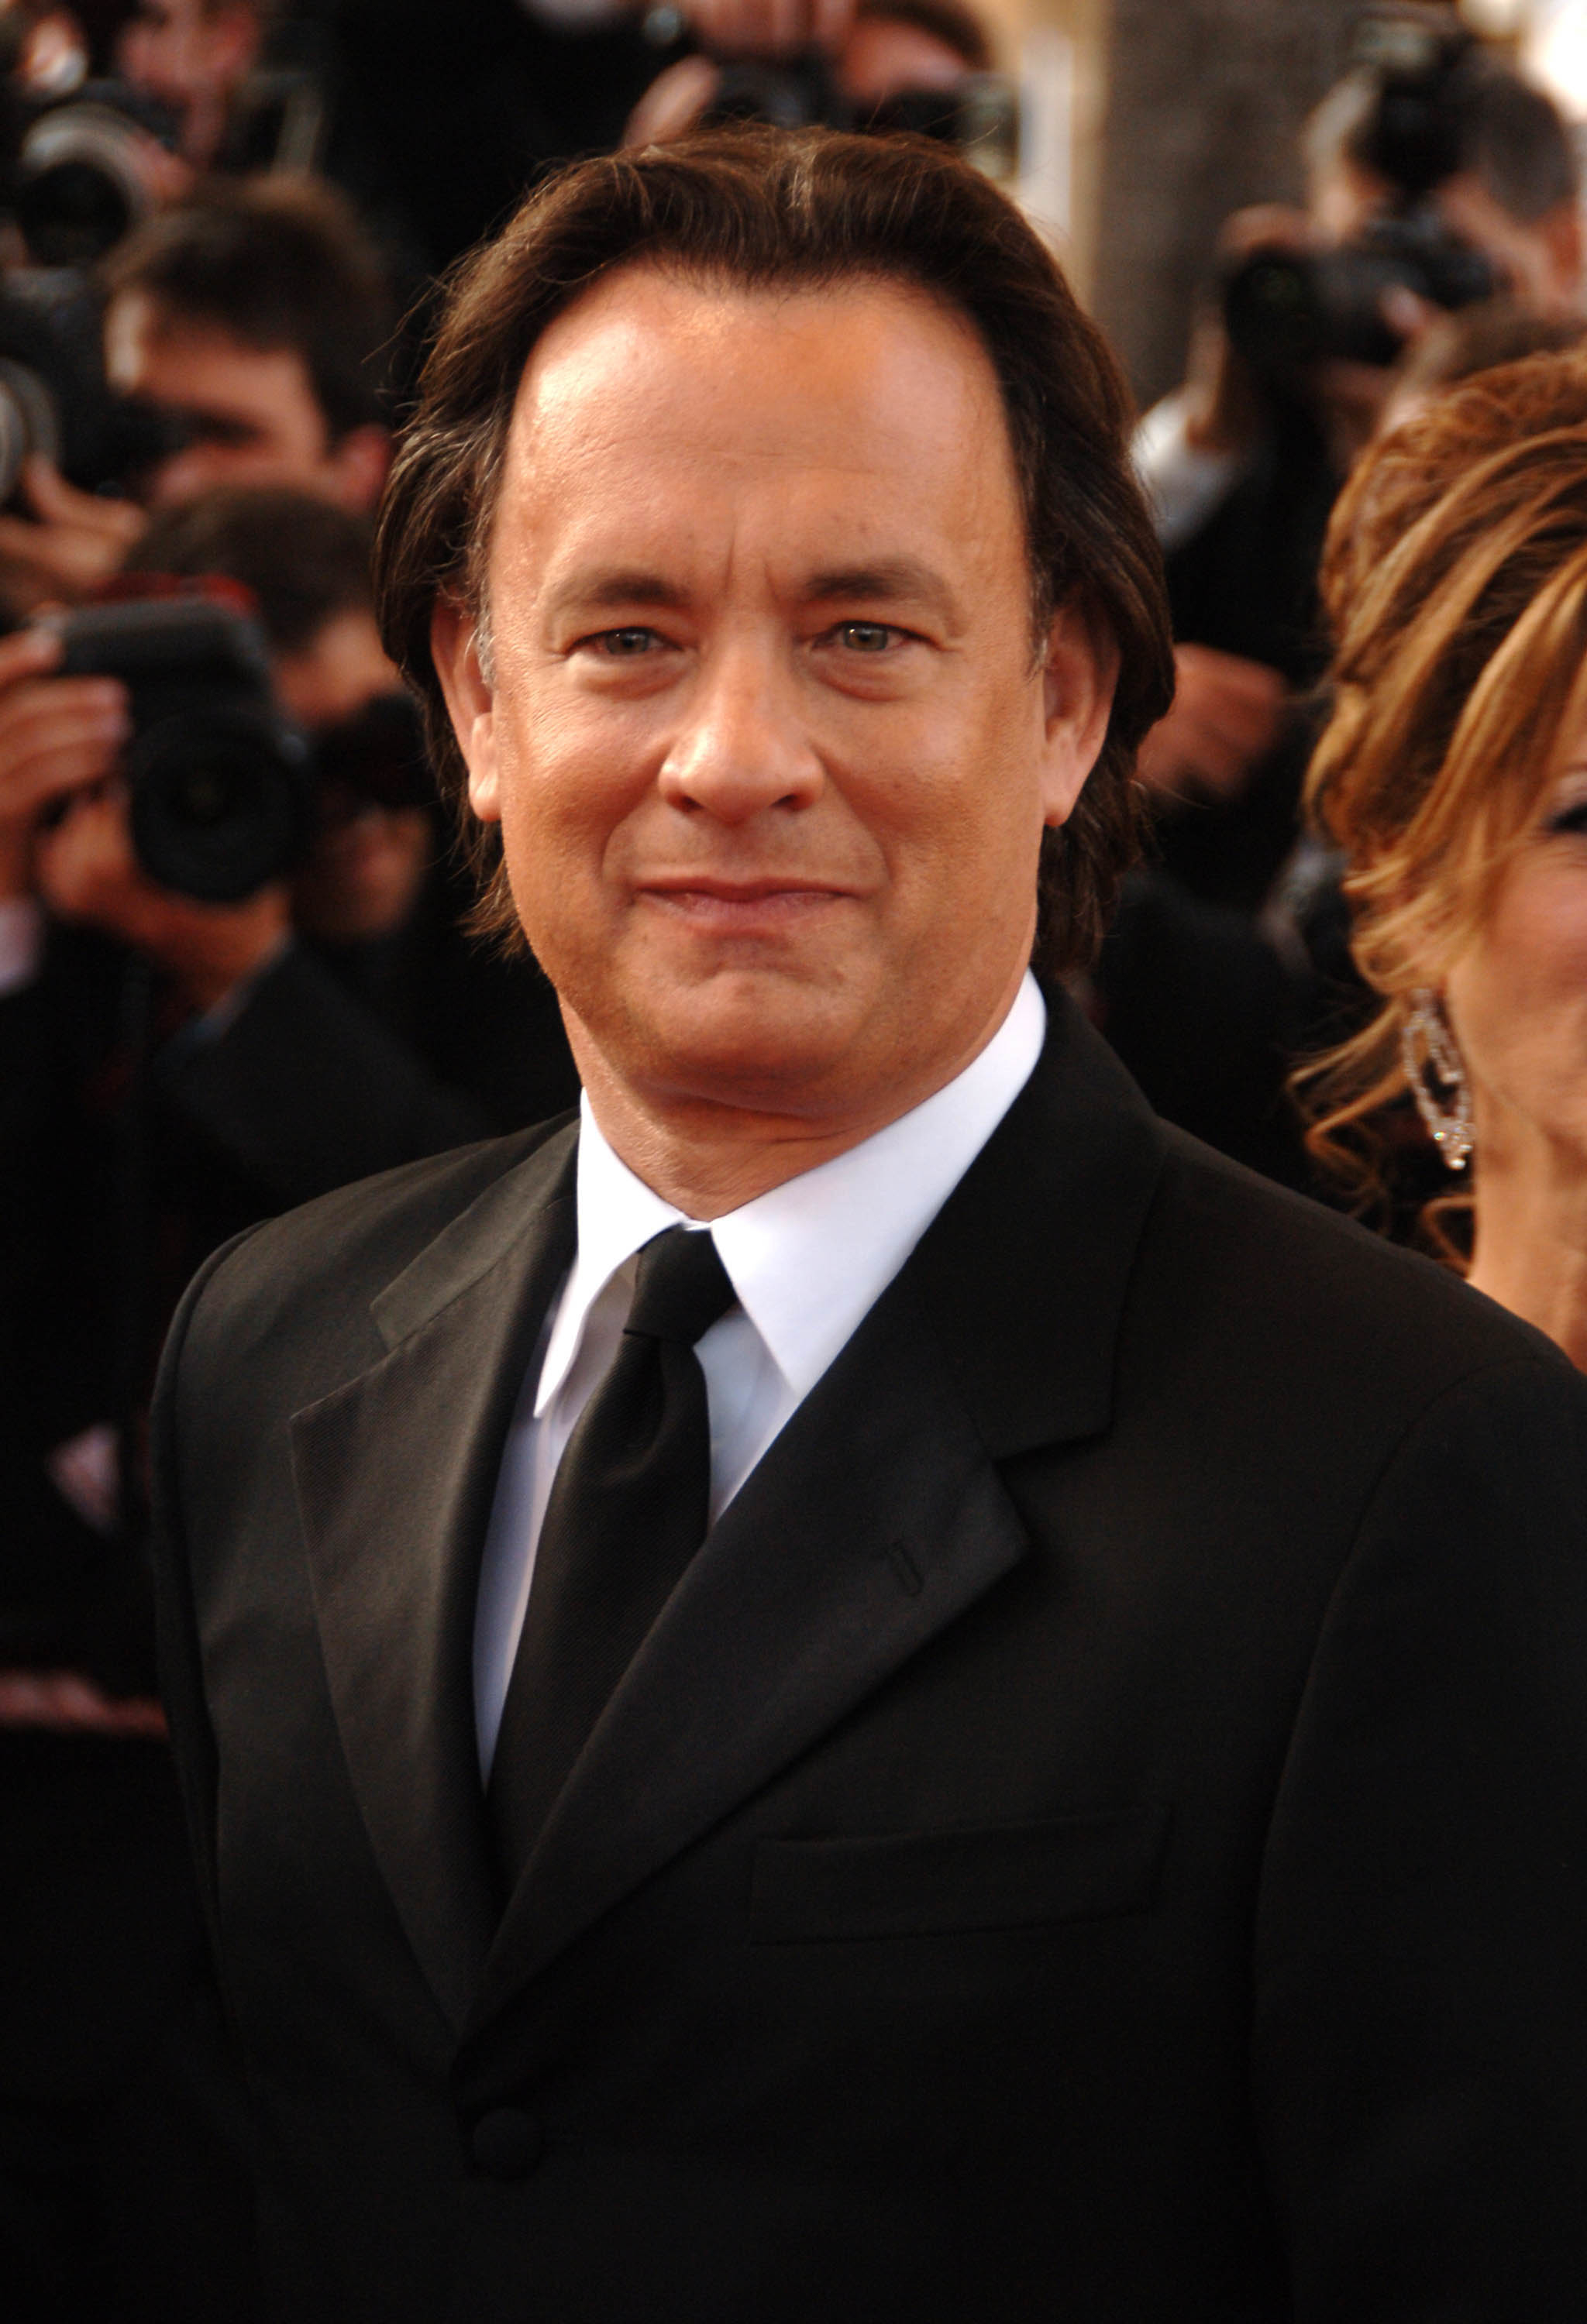 Tom Hanks in a classic black tie attire at an event, looking directly at the camera